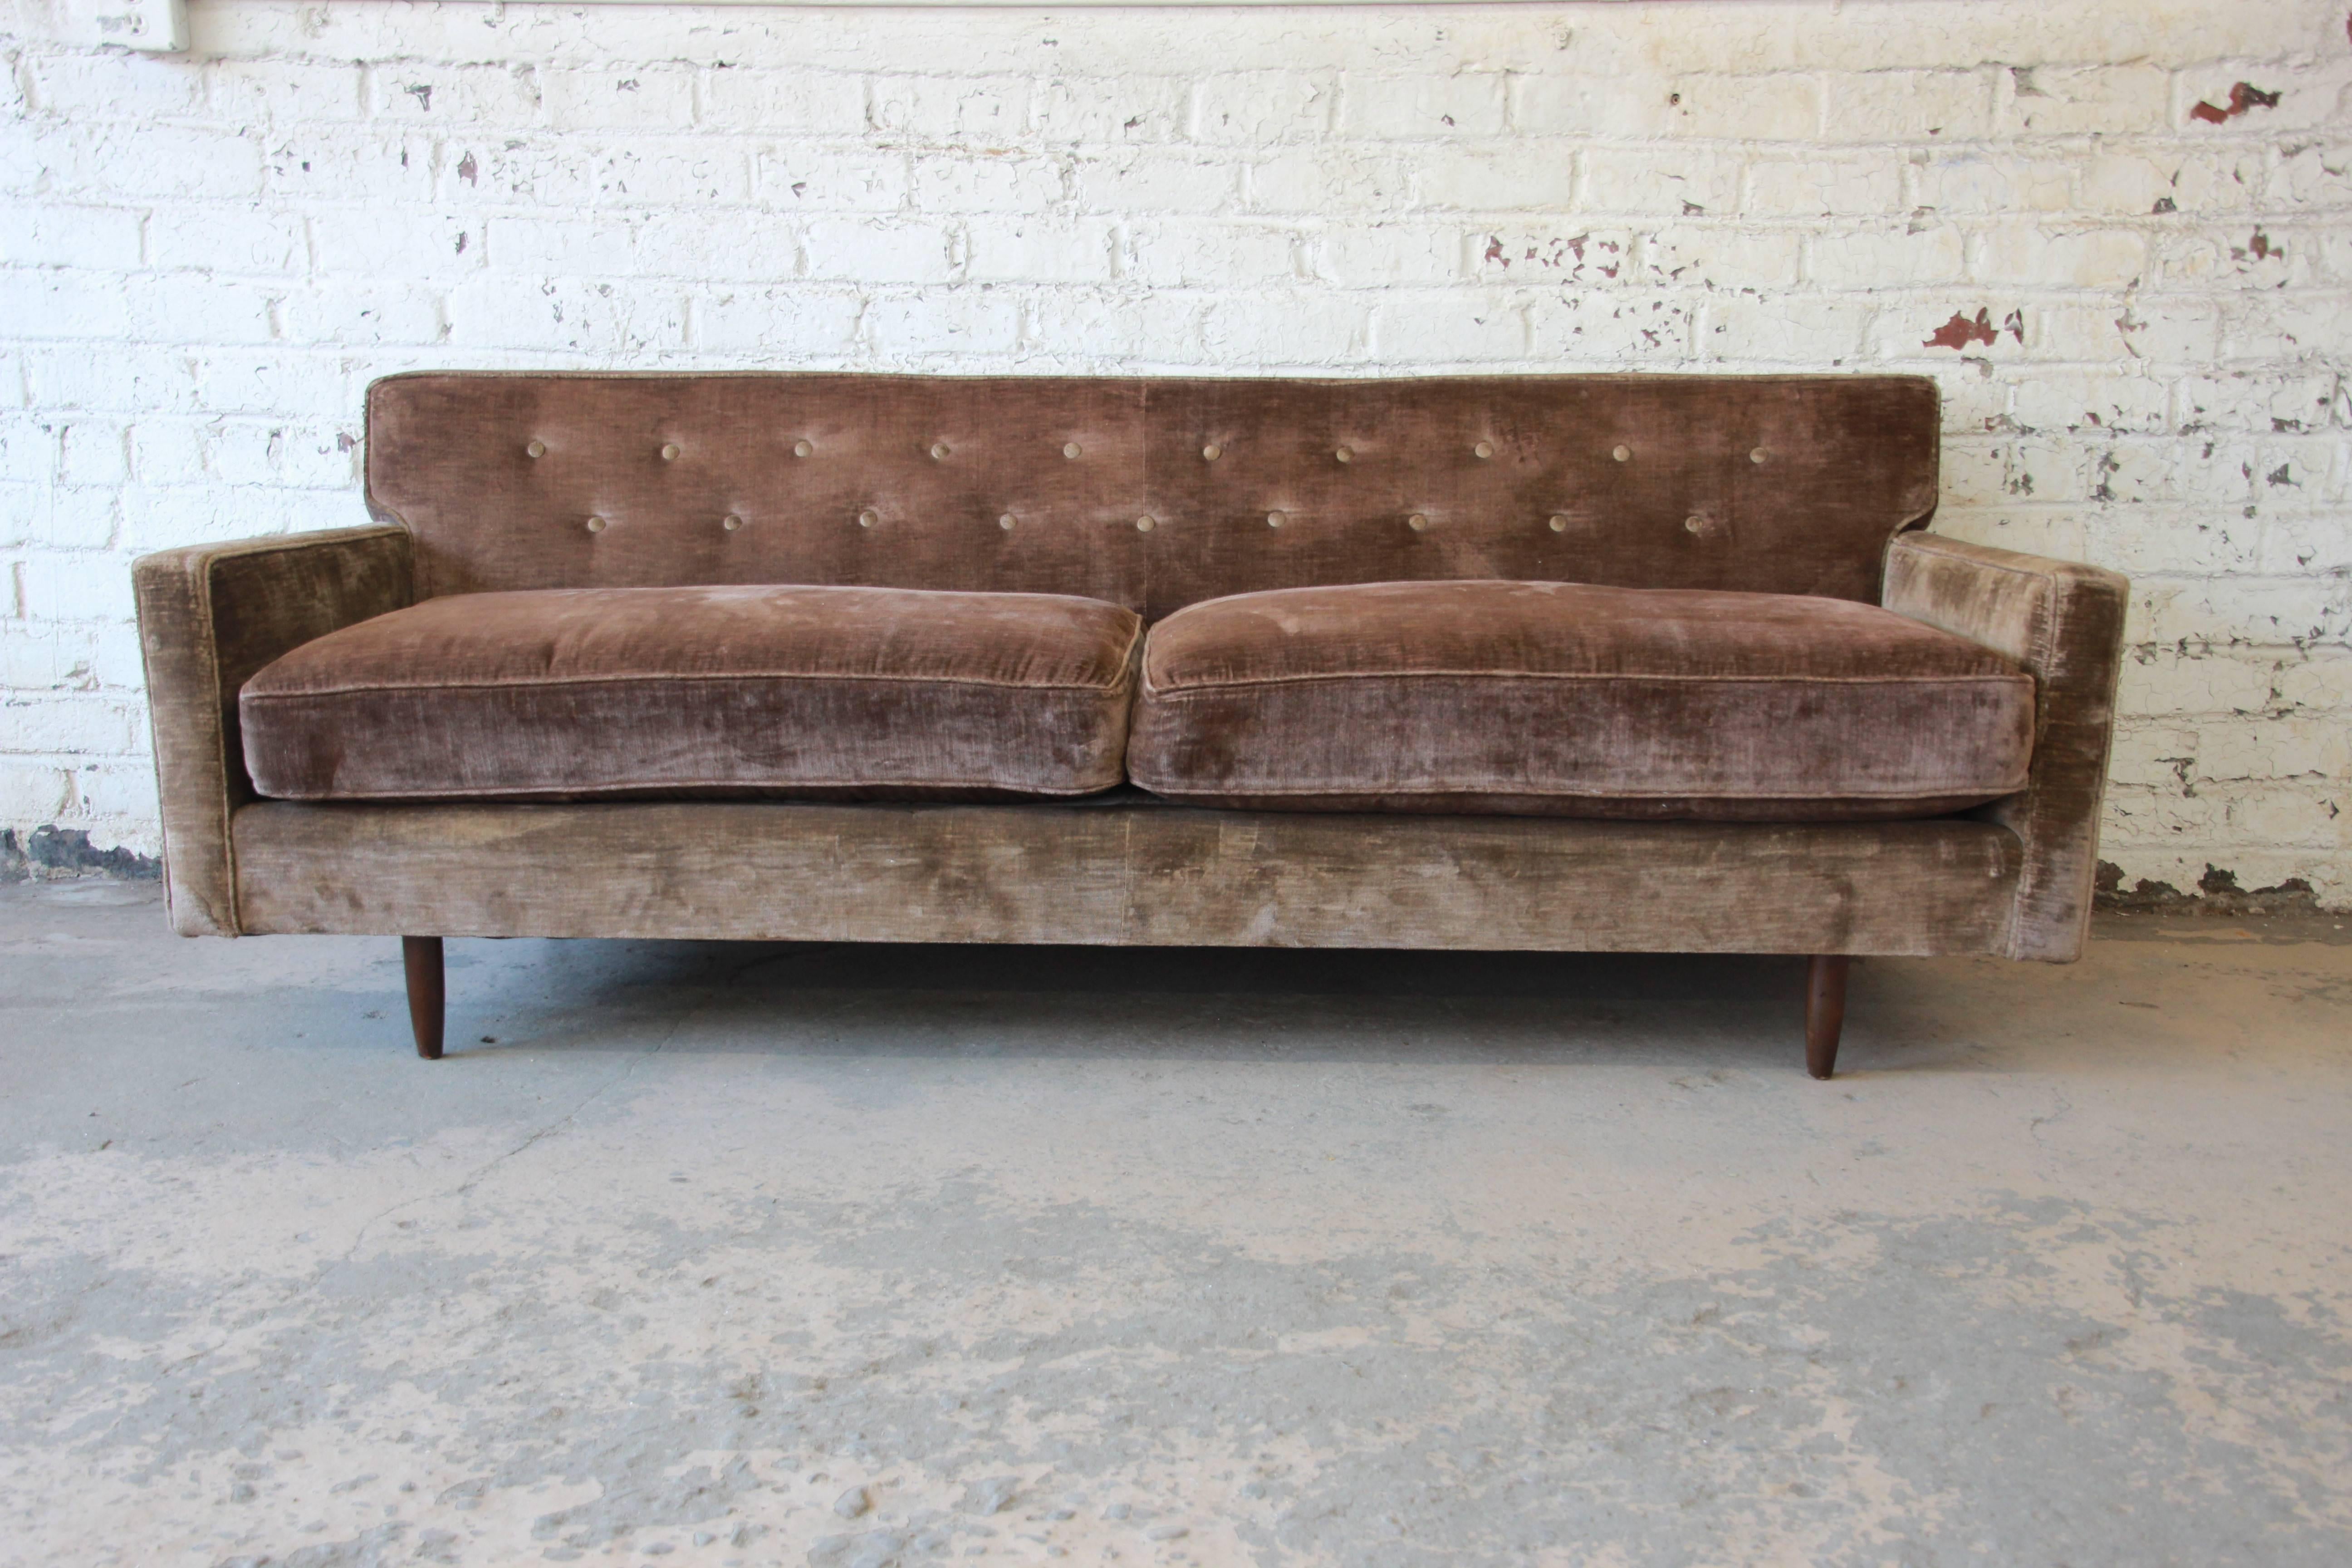 A gorgeous Mid-Century Modern tufted brown velvet sofa by Baker Furniture. The sofa features nice brown velvet upholstery, with a unique herringbone-patterned fabric on the back. It has nice clean midcentury lines and sits on straight solid walnut